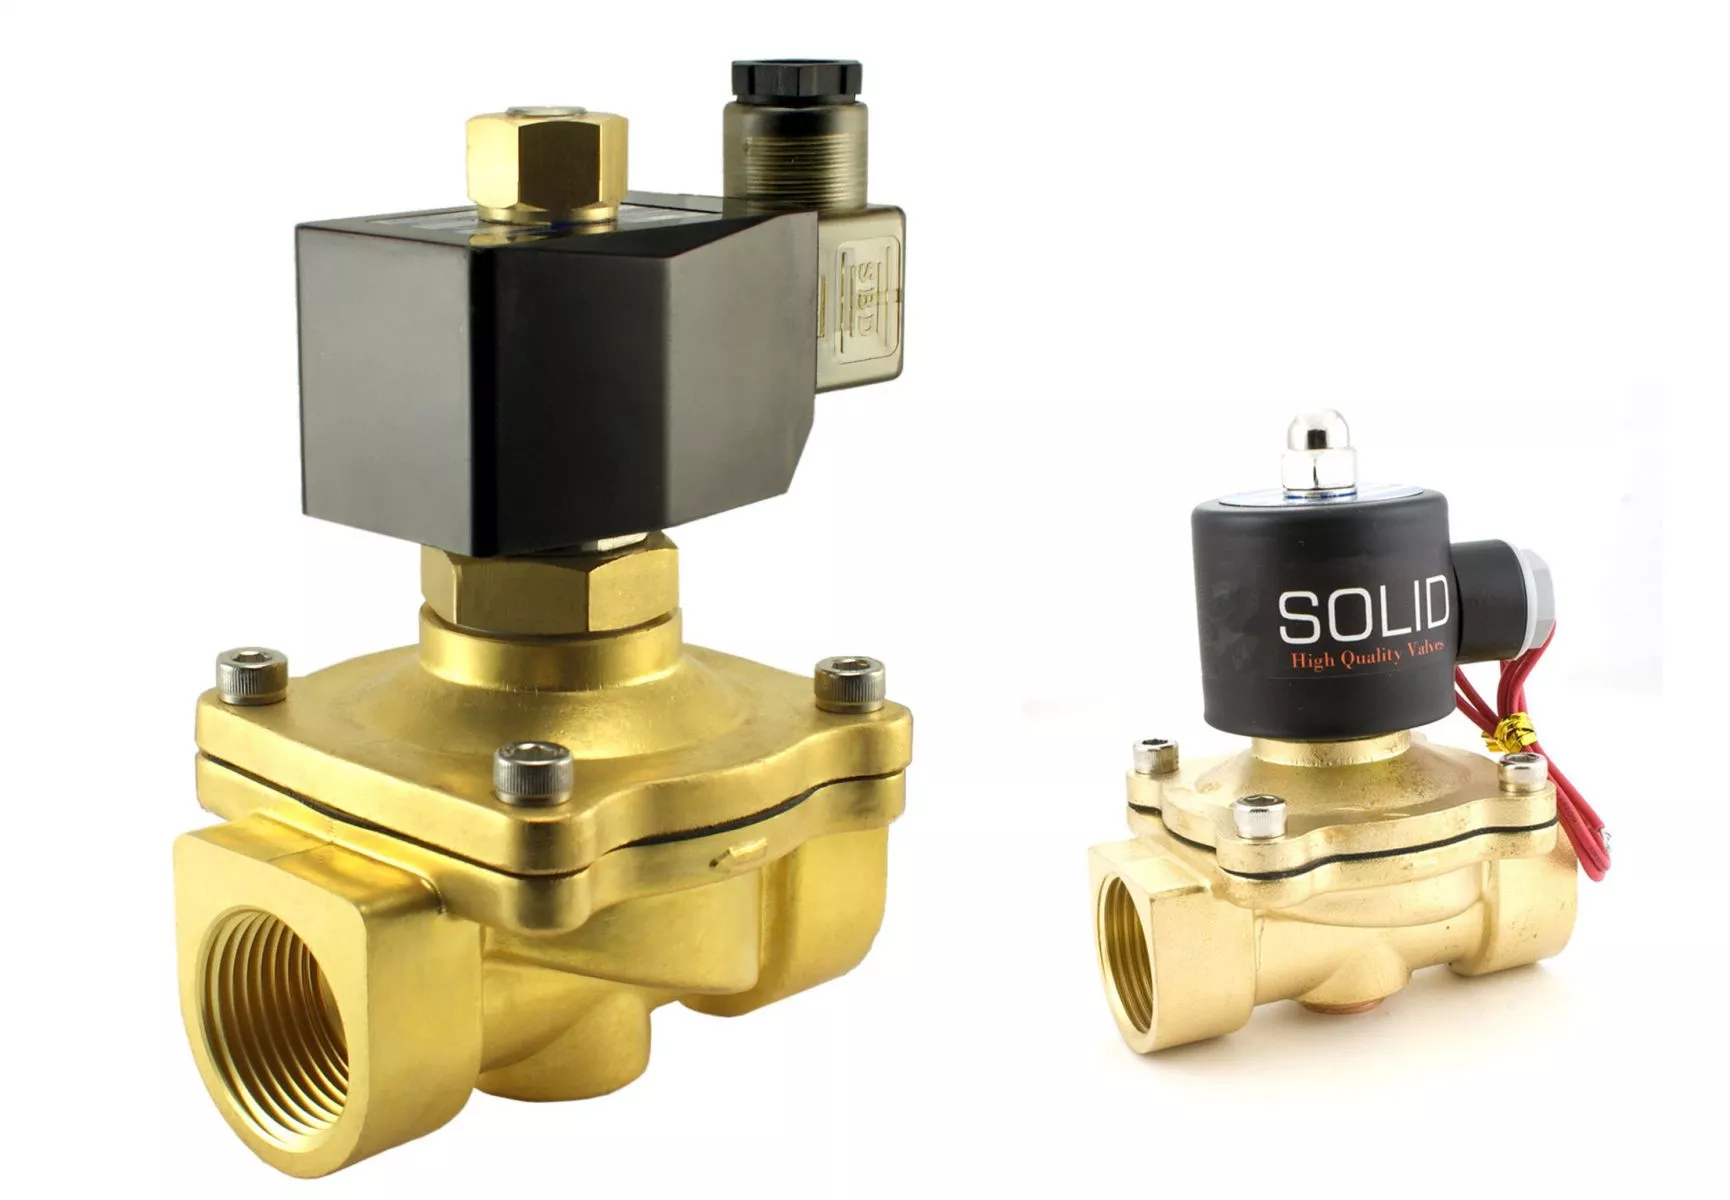 Difference between Solenoid Valves and Electric Valves